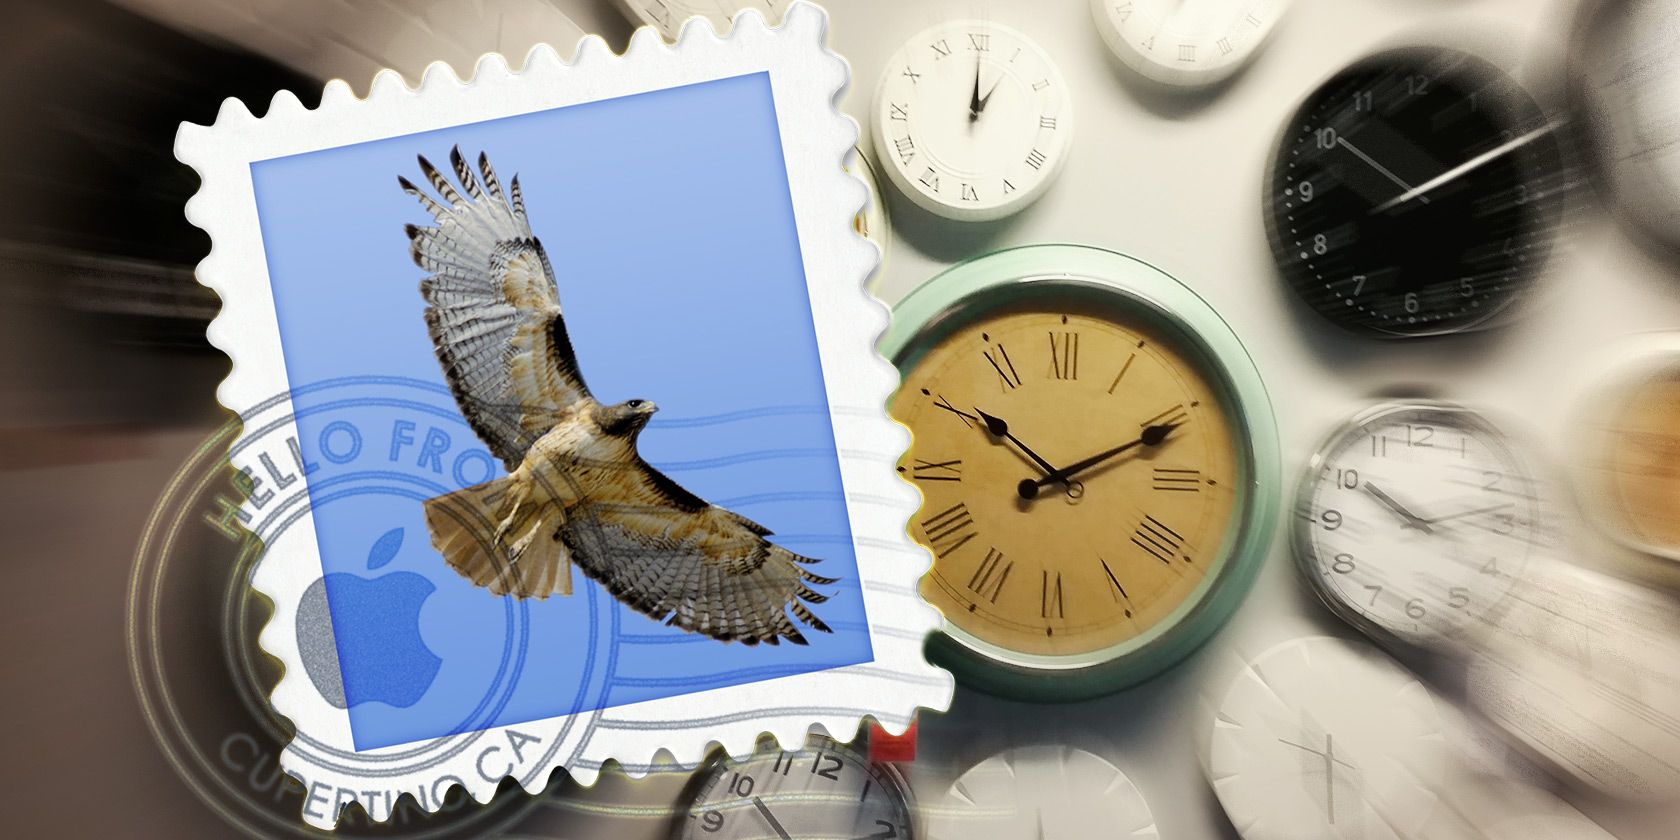 Mac Mail logo with clocks in the background.